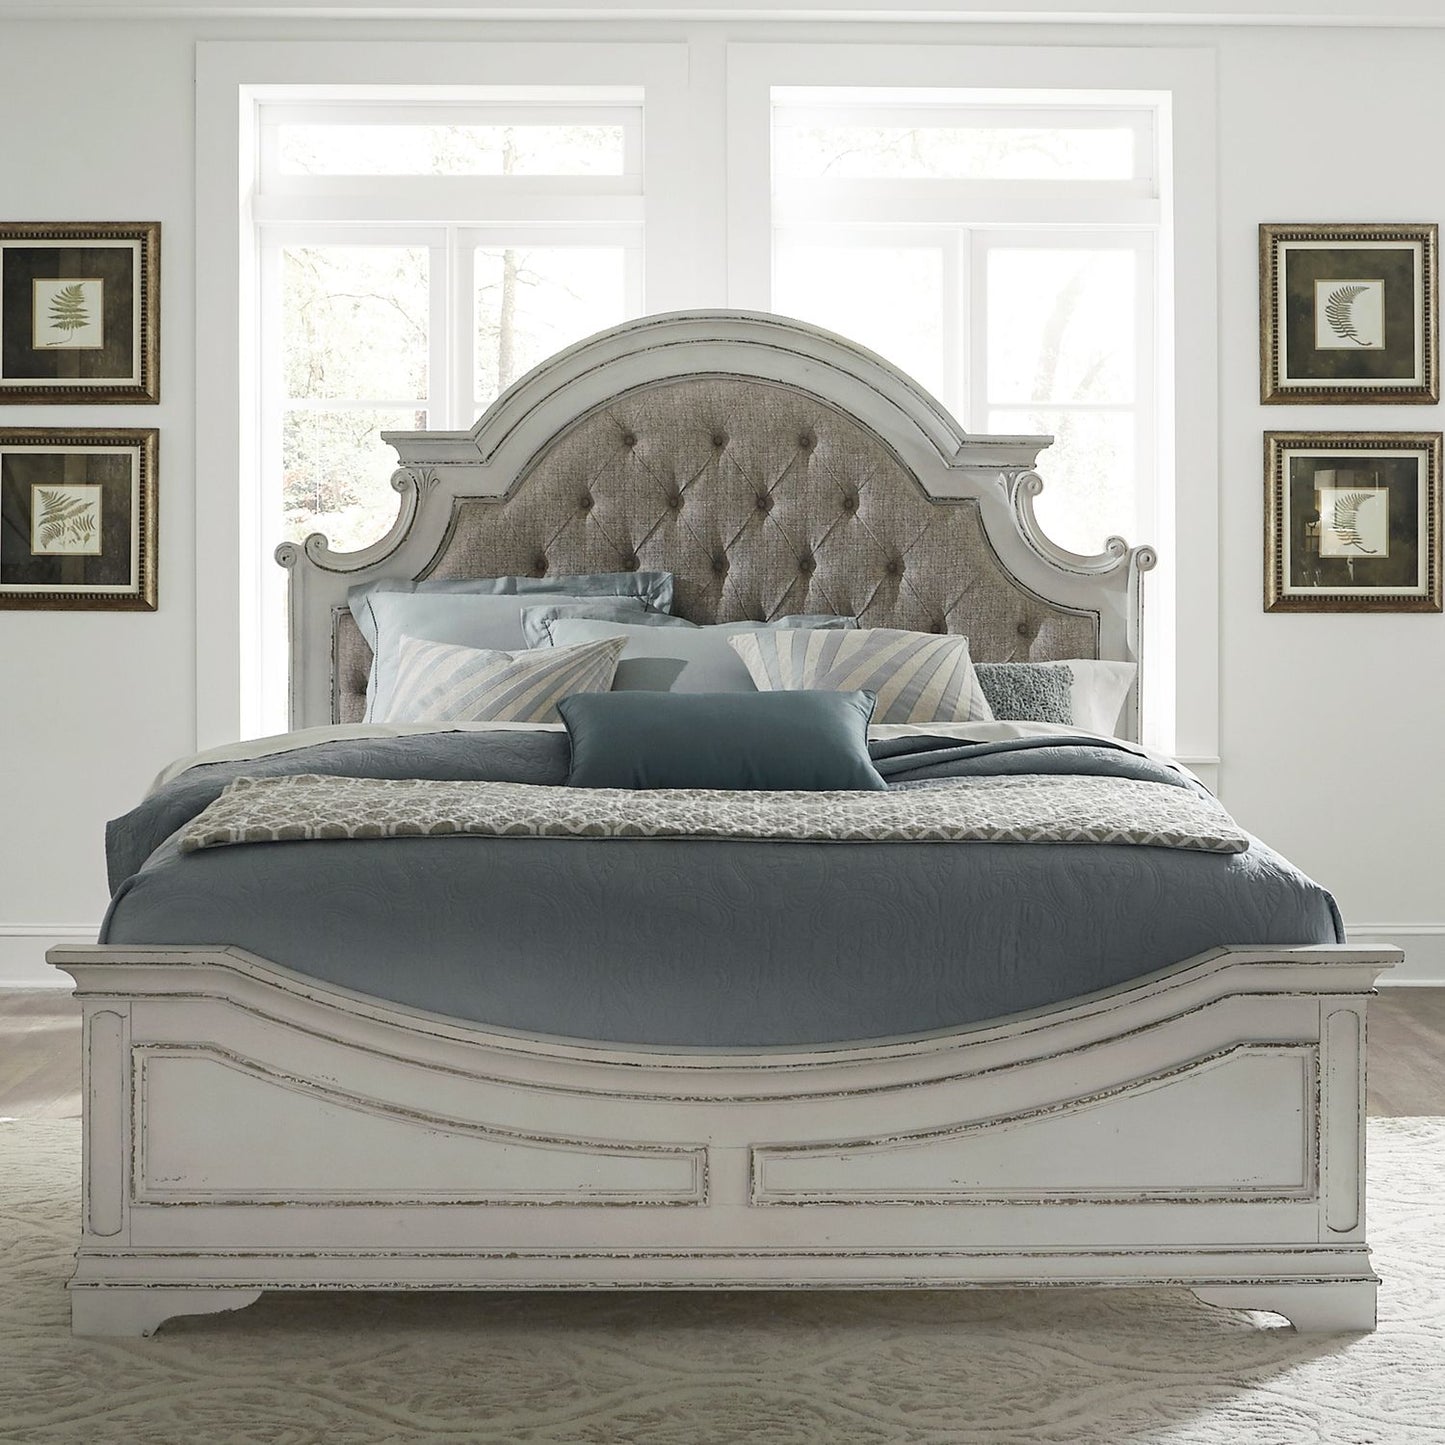 Magnolia Manor - King California Upholstered Bed